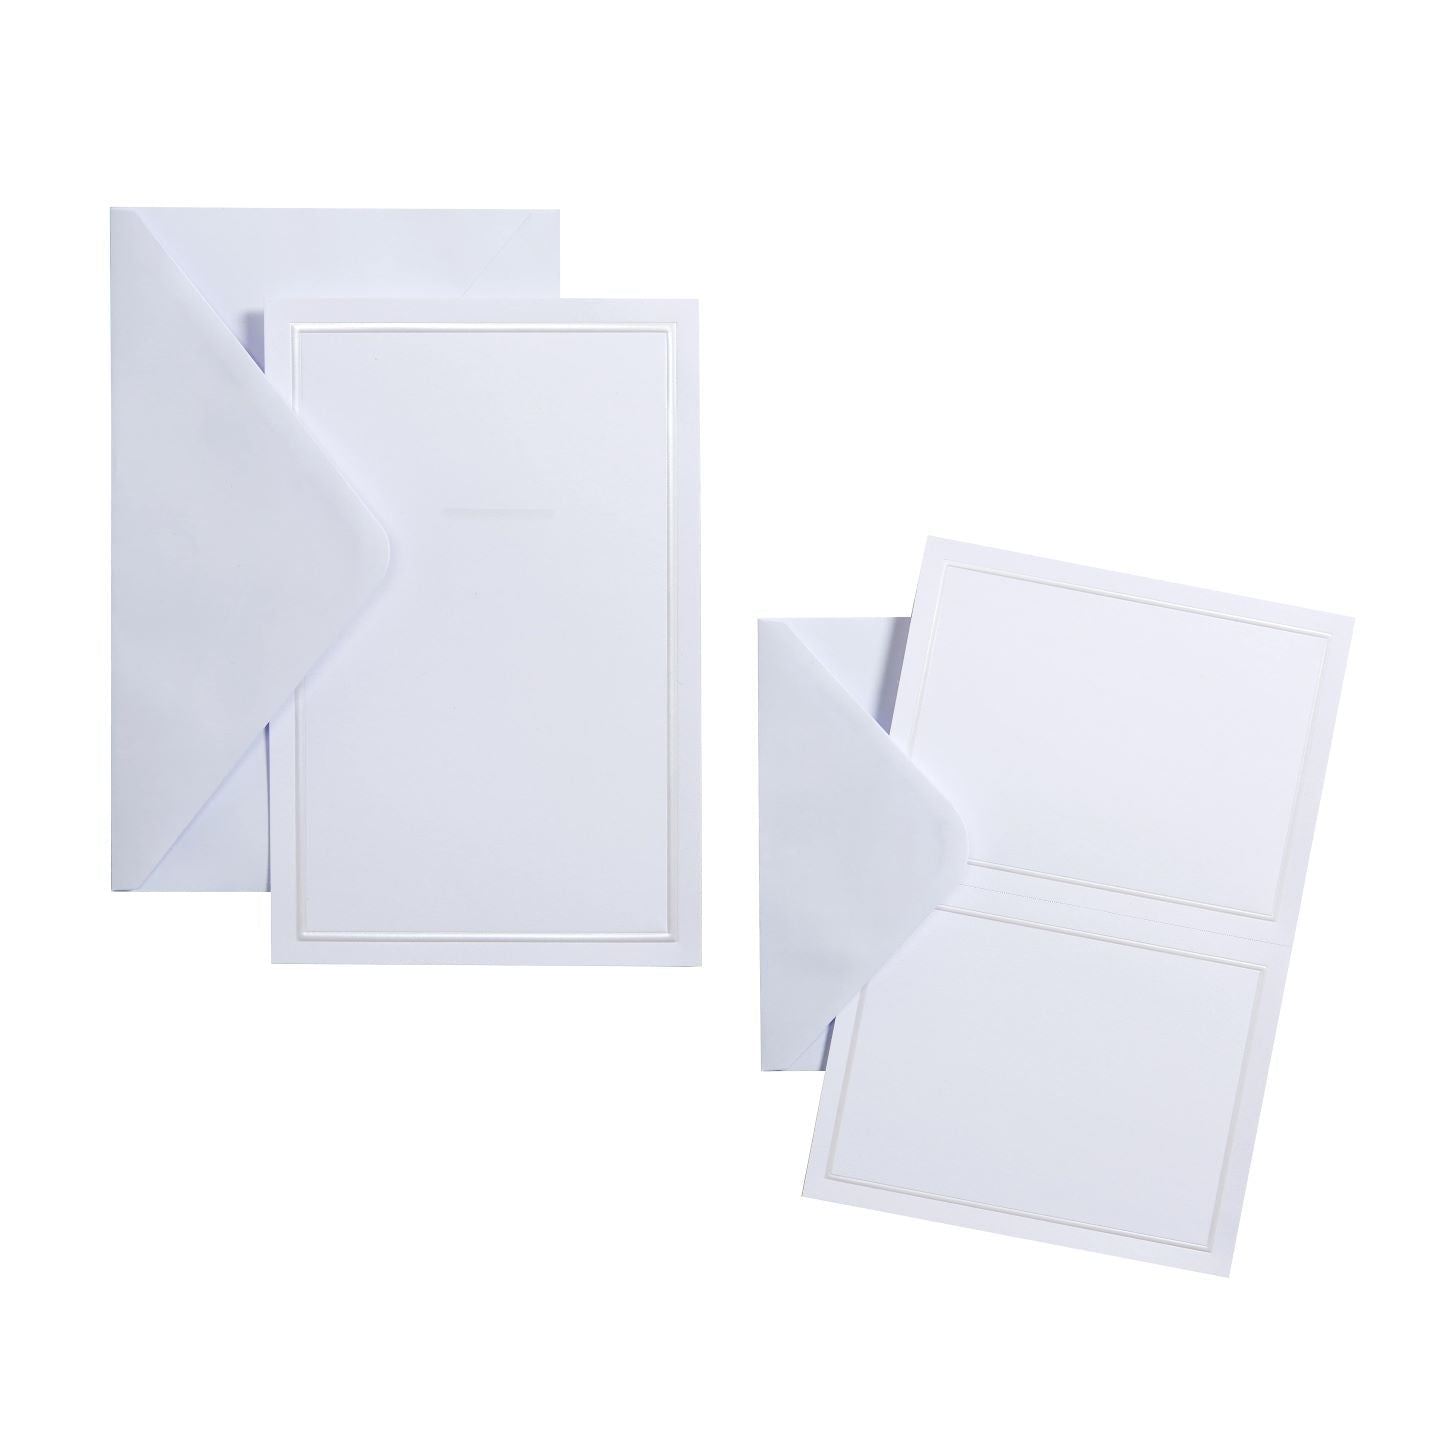 Pearl And Ivory Print At Home Wedding Invitations, Response Cards +  All-Purpose Cards Kit